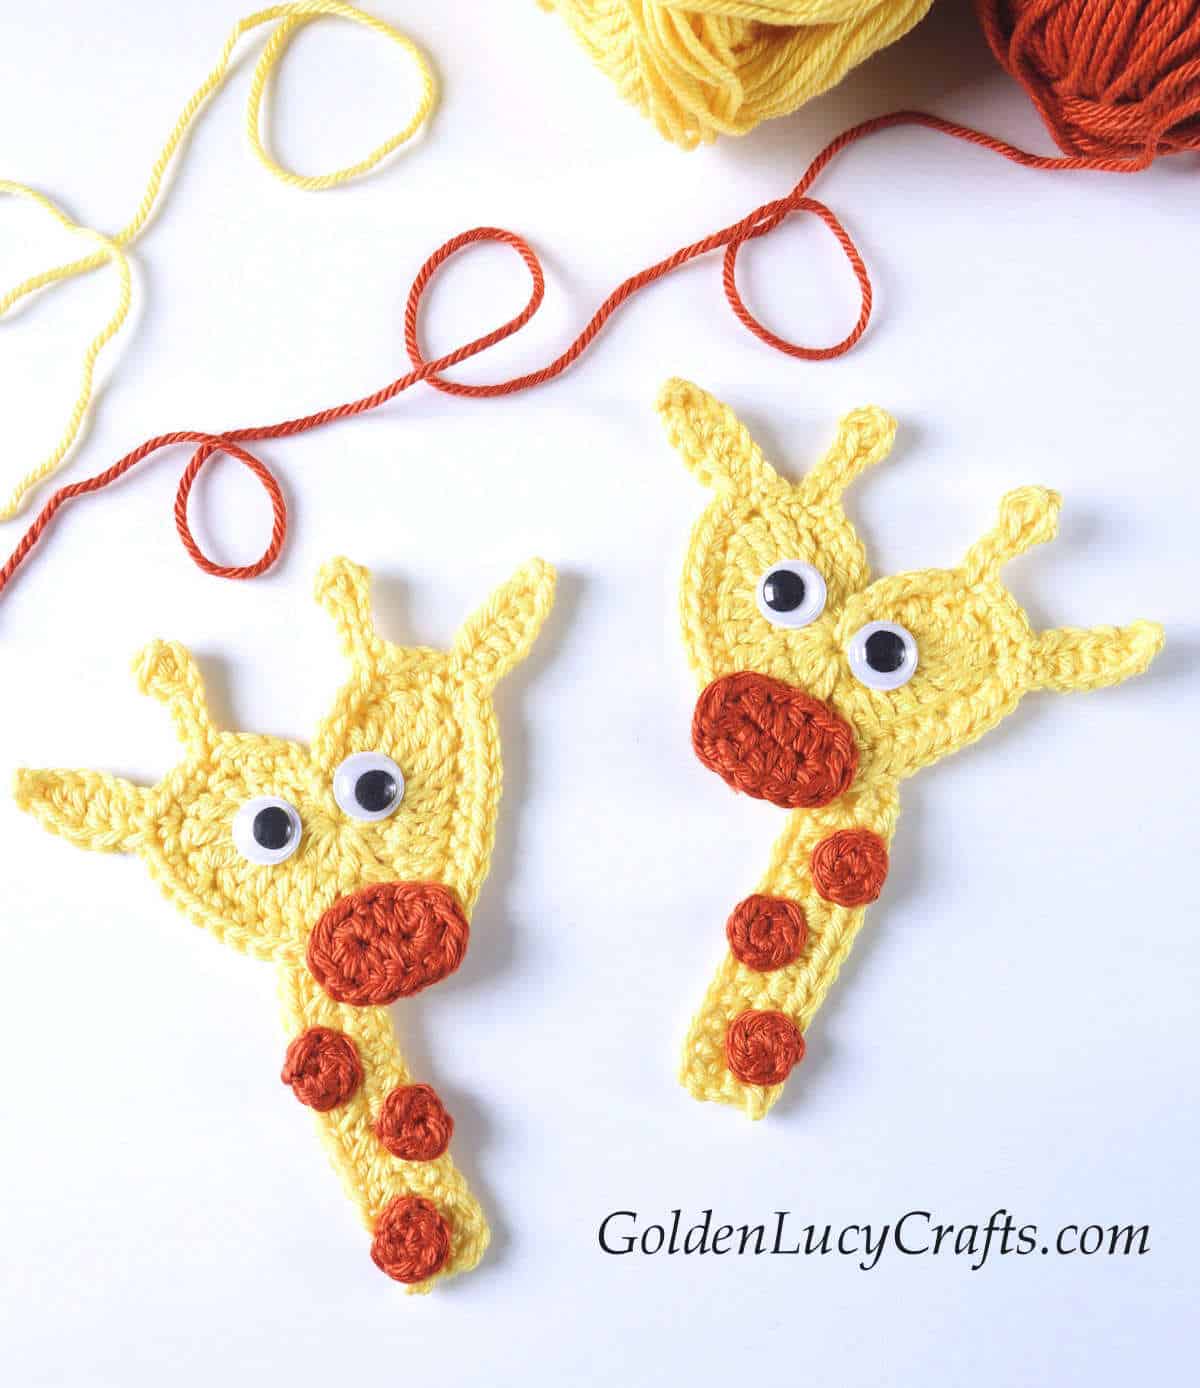 Two crocheted giraffe appliques with googly eyes.